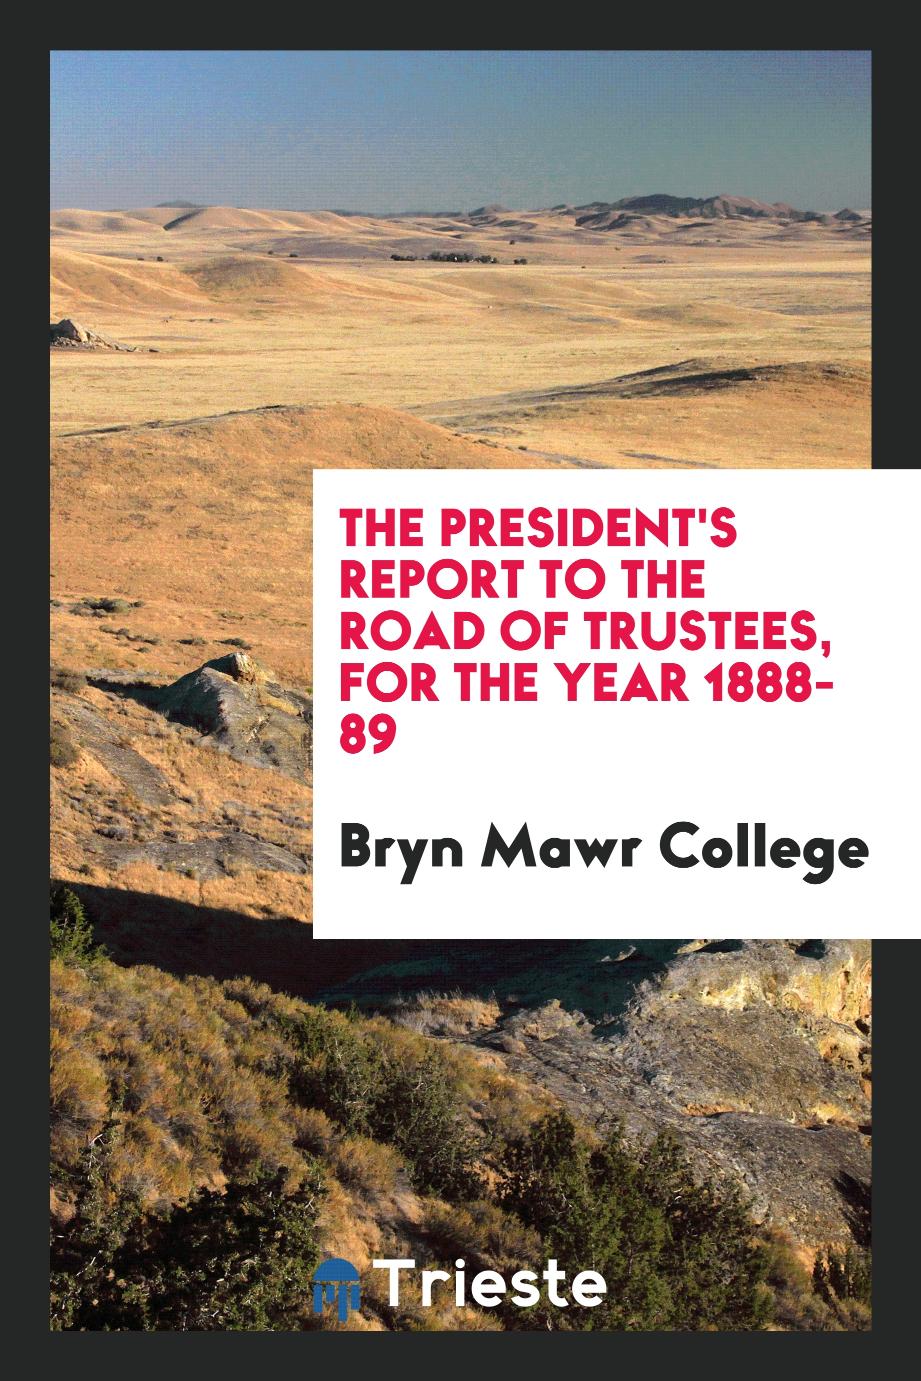 the President's Report to the road of trustees, for the year 1888-89